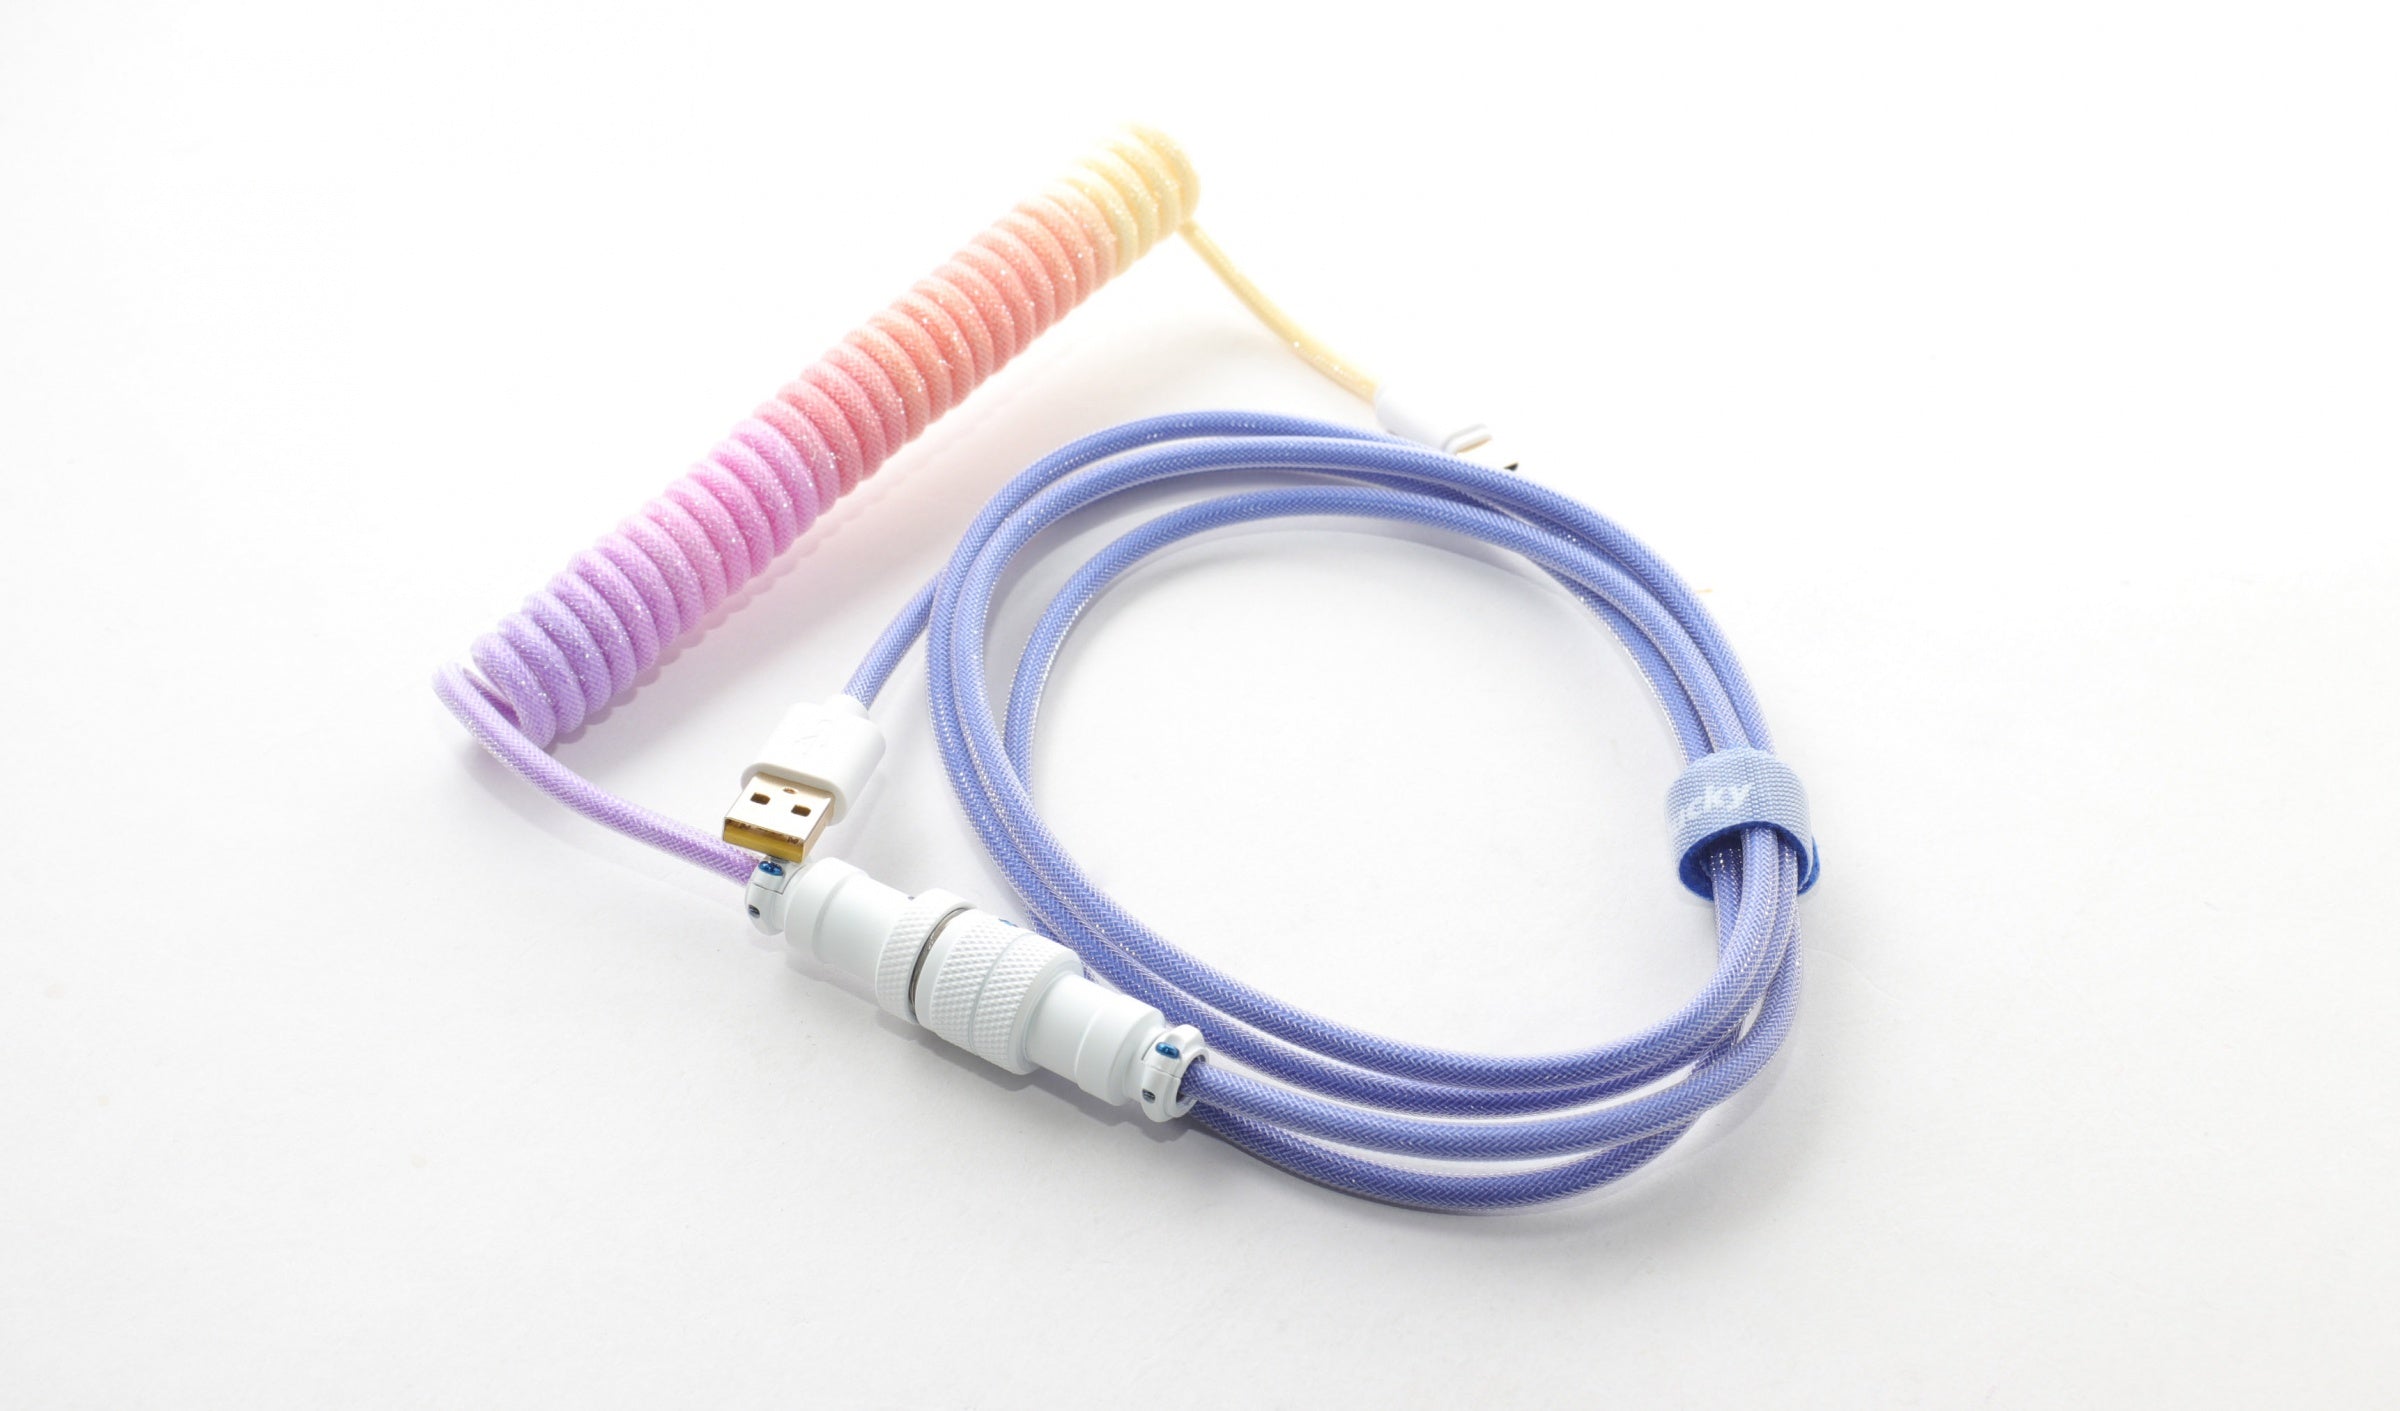 Ducky Afterglow Coiled USB Cable V2 MK6136O4MJ |40276|